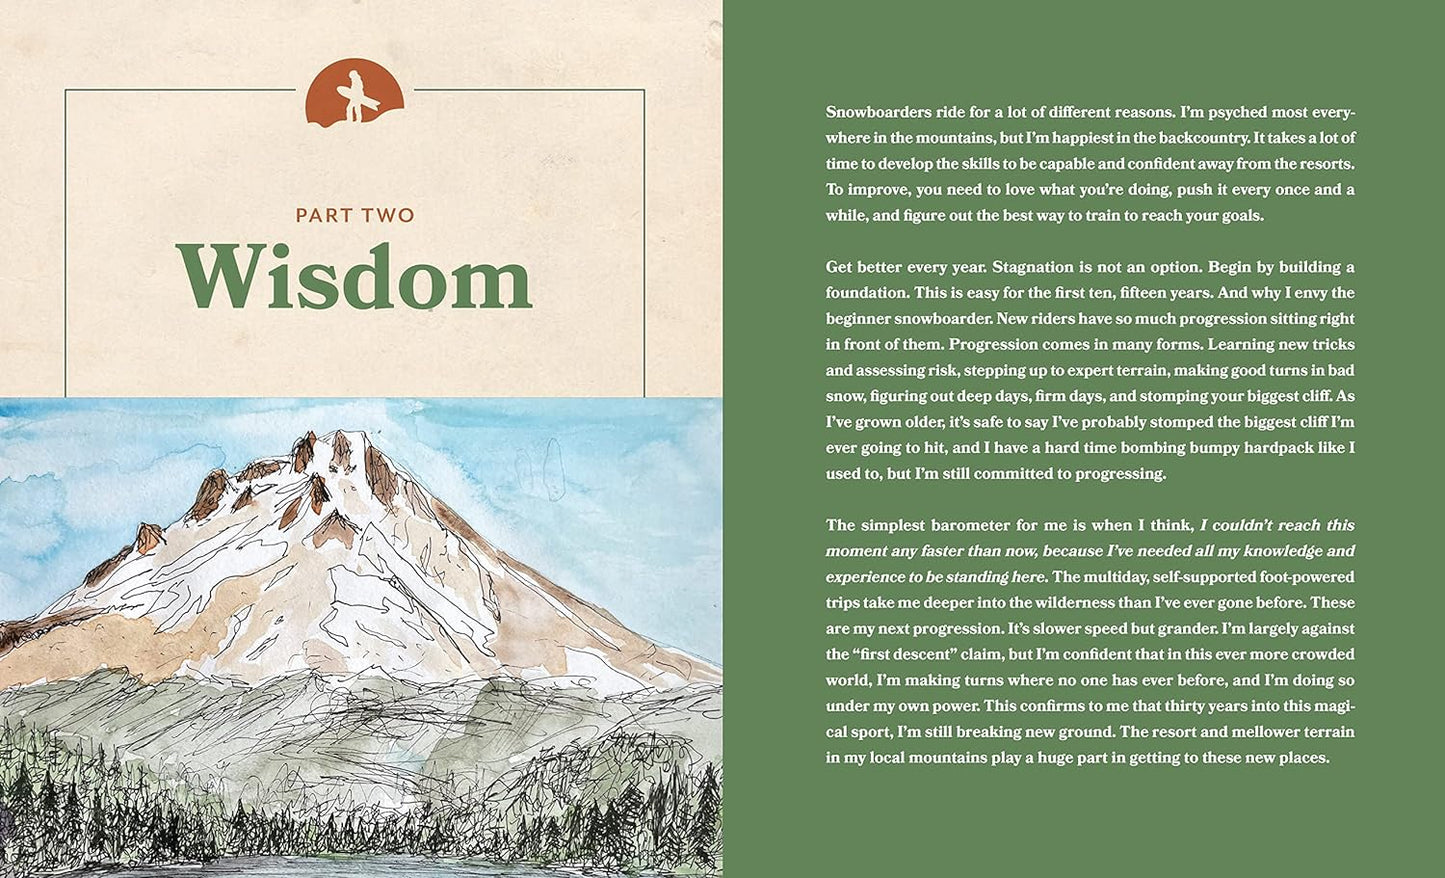 The Art Of Shralpinism Lessons From The Mountains Jeremy Jones | Backcountry Books